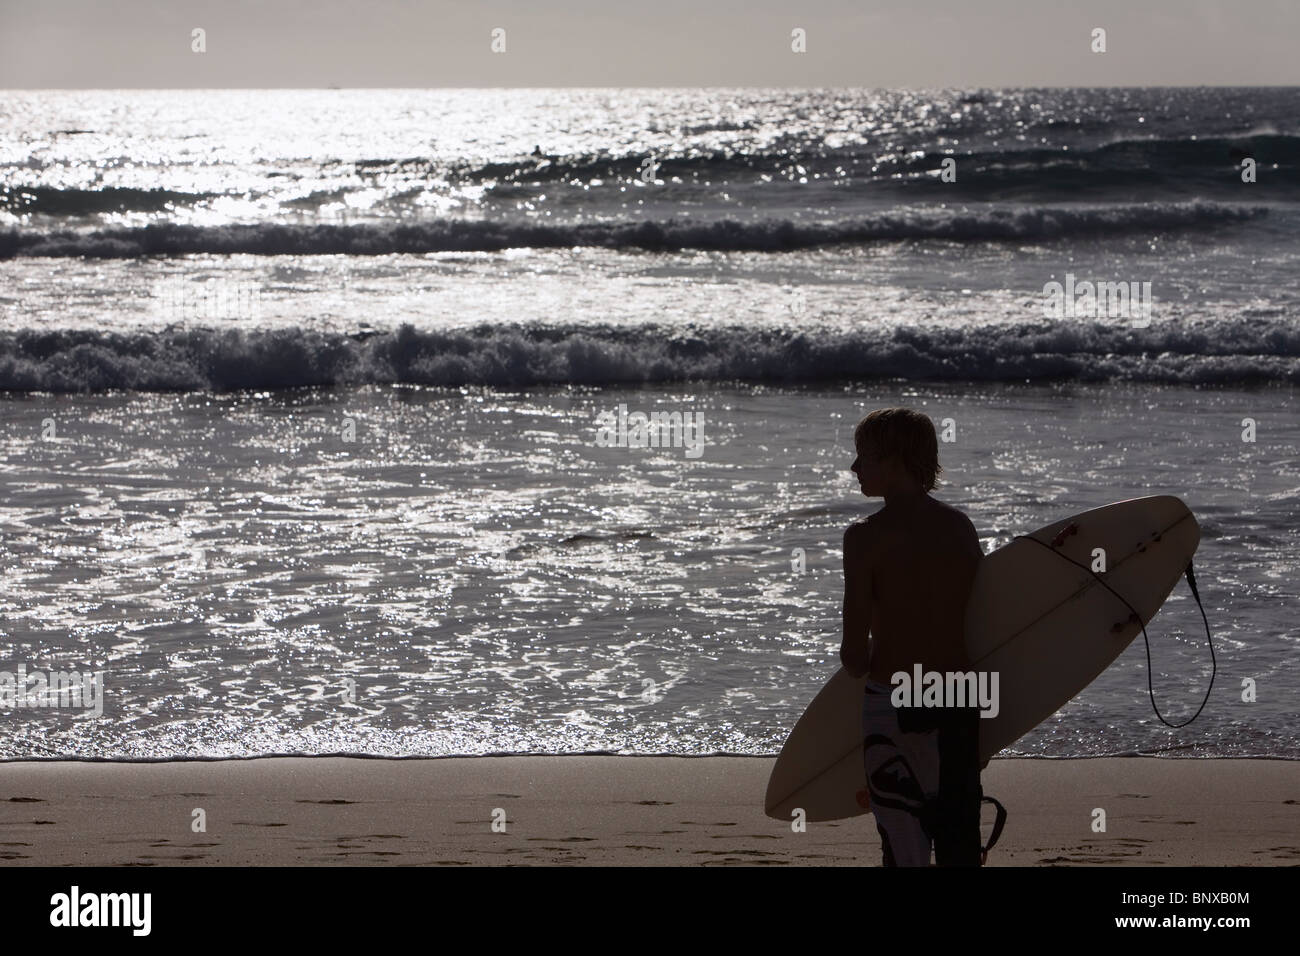 A surfer looks out to the waves at Manly Beach. Sydney, New South Wales, AUSTRALIA Stock Photo